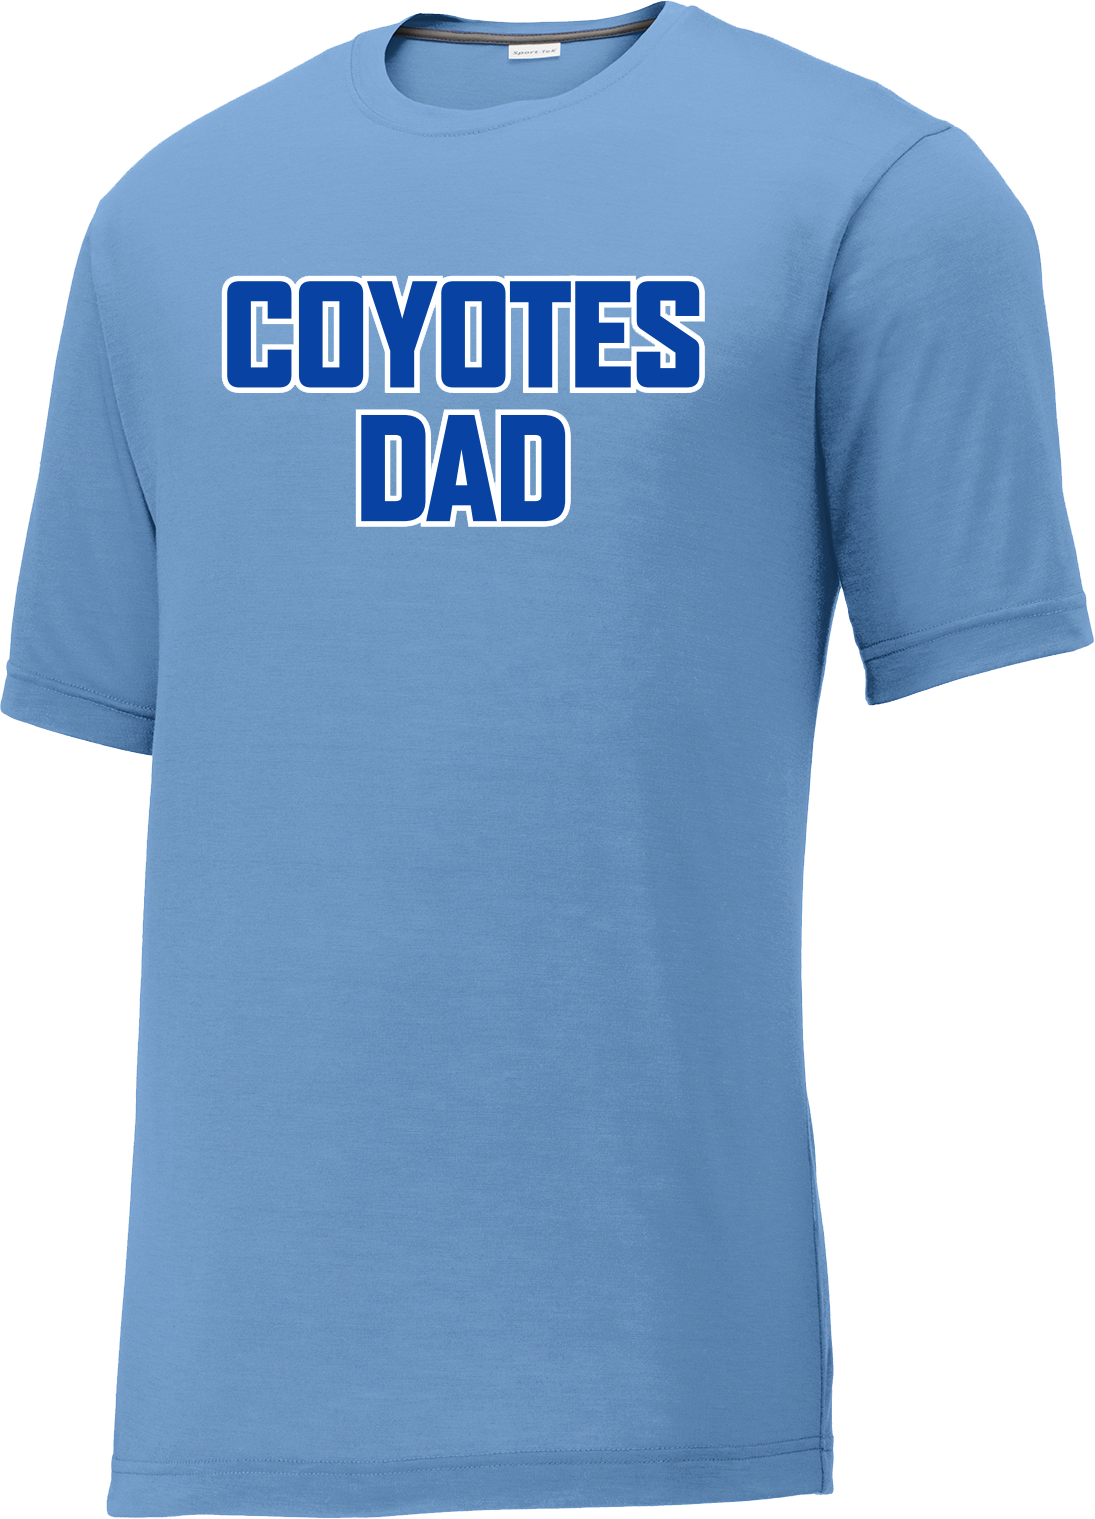 Coyotes Dad CottonTouch Performance T-Shirt